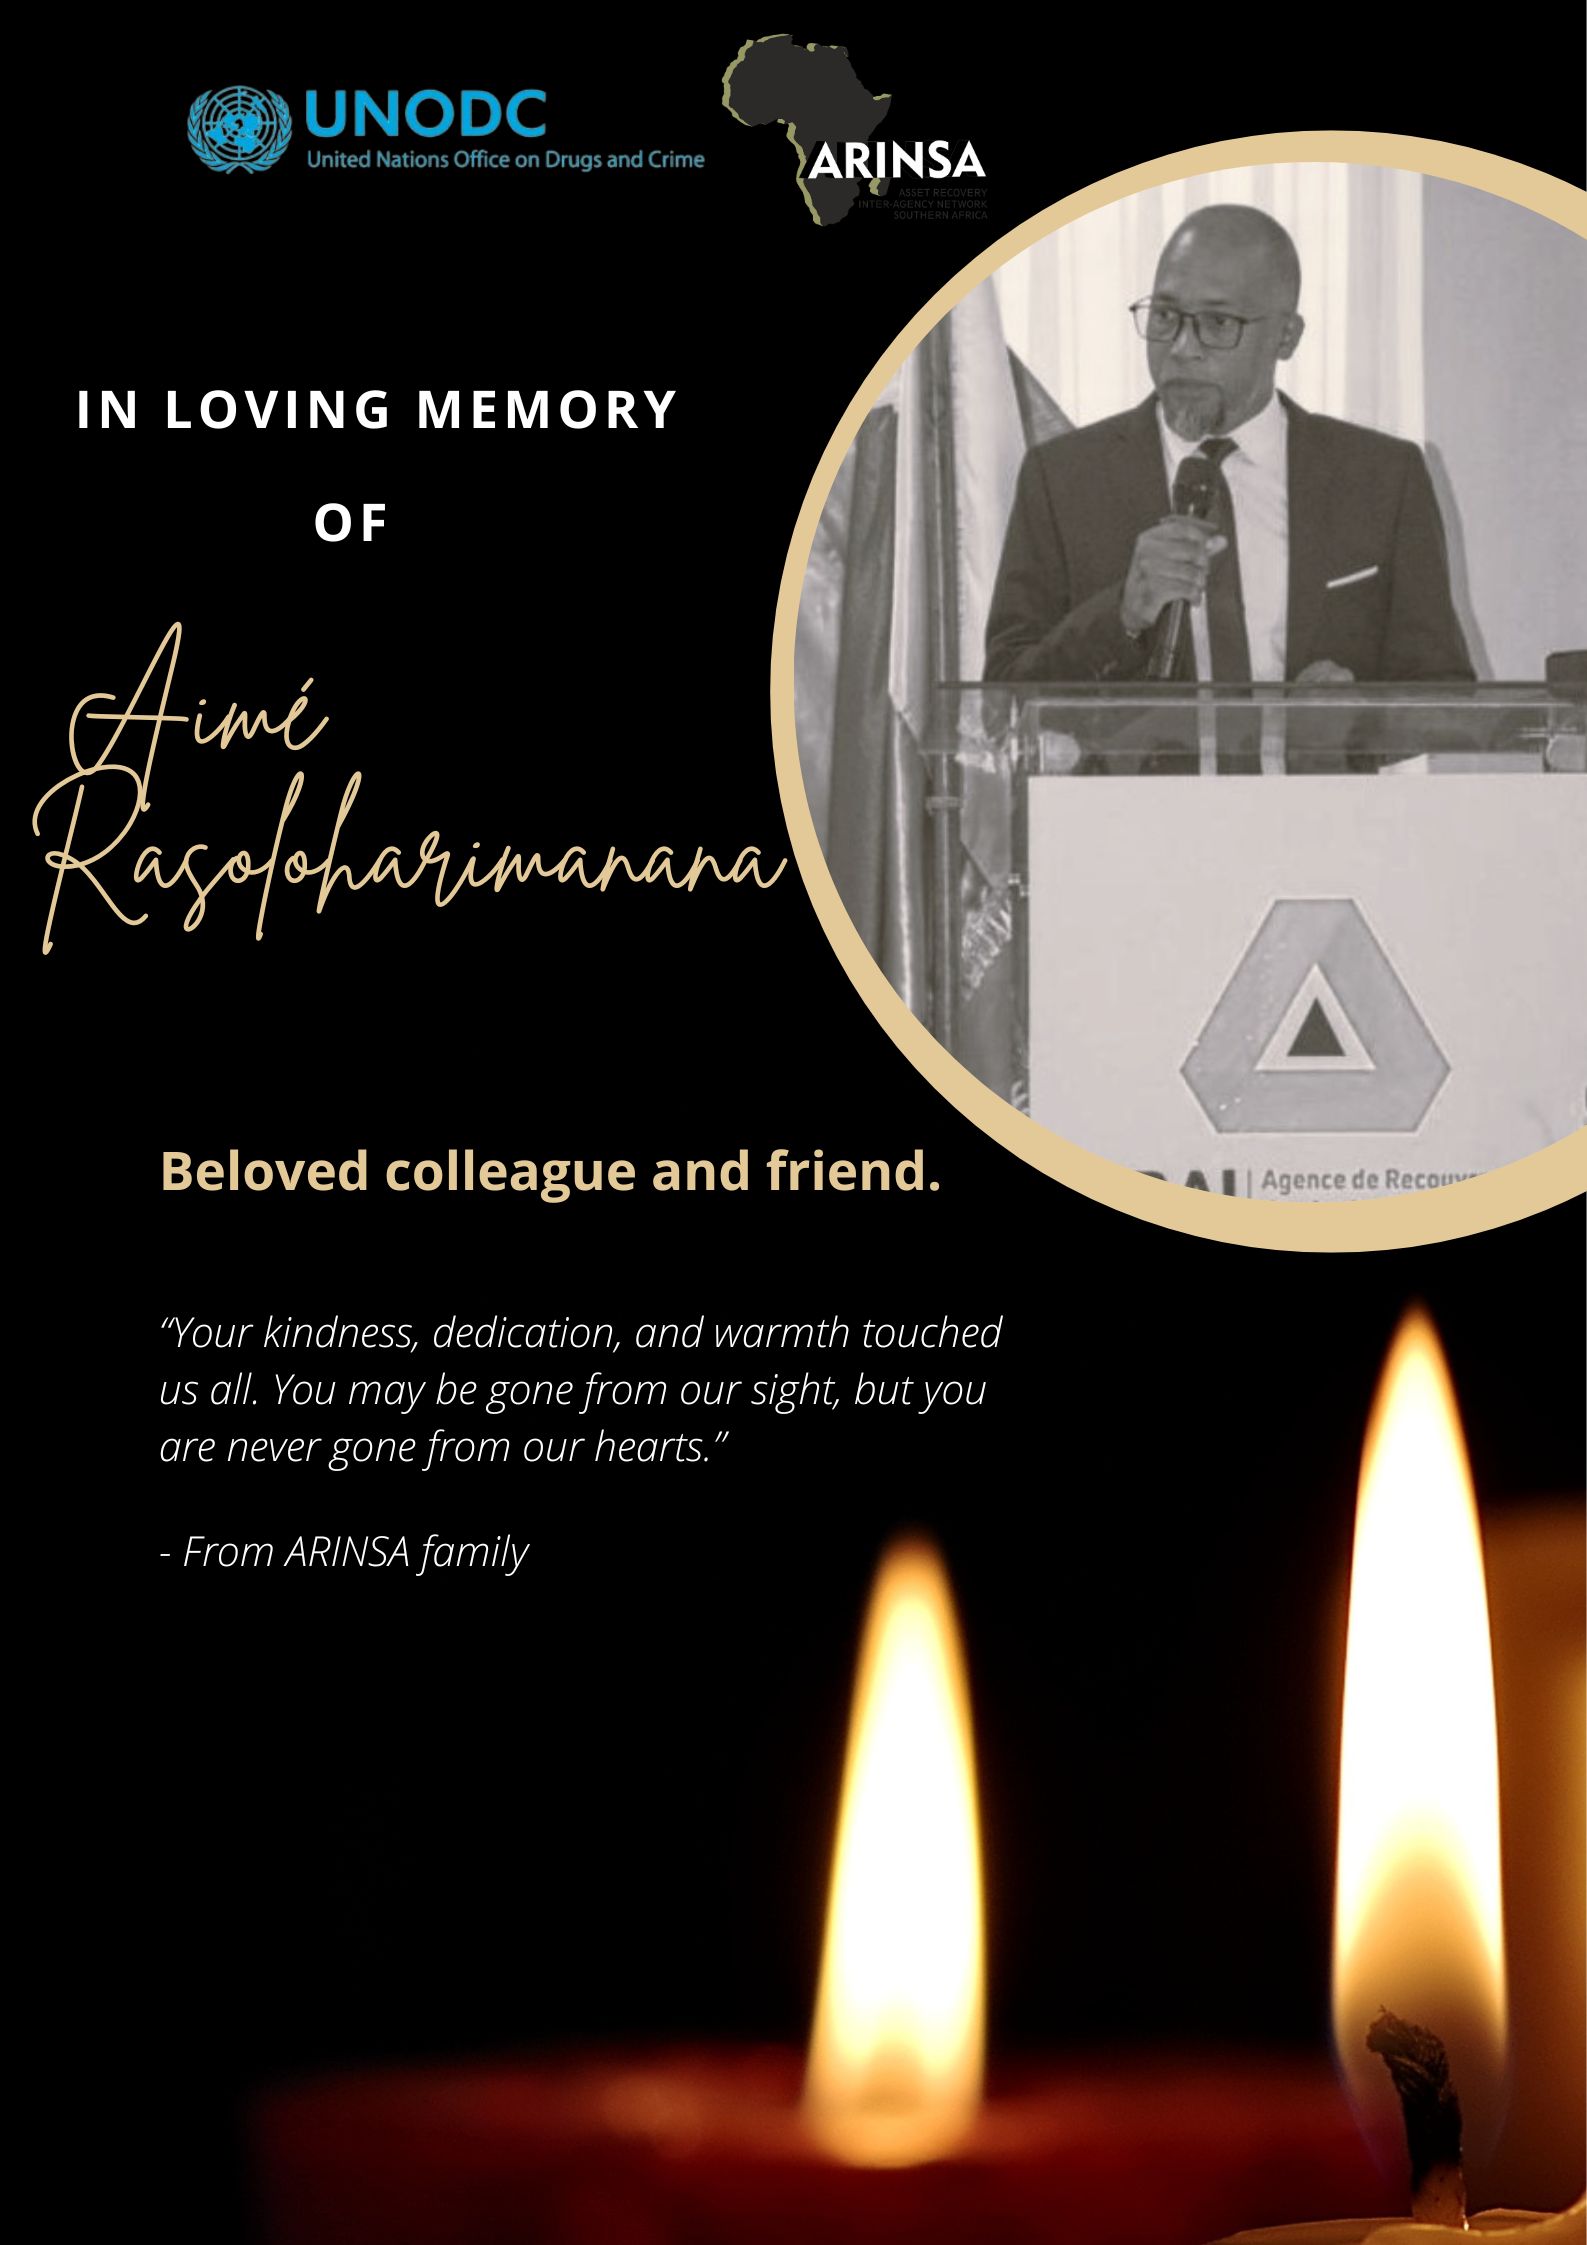 Memorial poster for Aimé Rasoloharimanana, Director General of the Agency for the Recovery of Illicit Assets (ARAI).